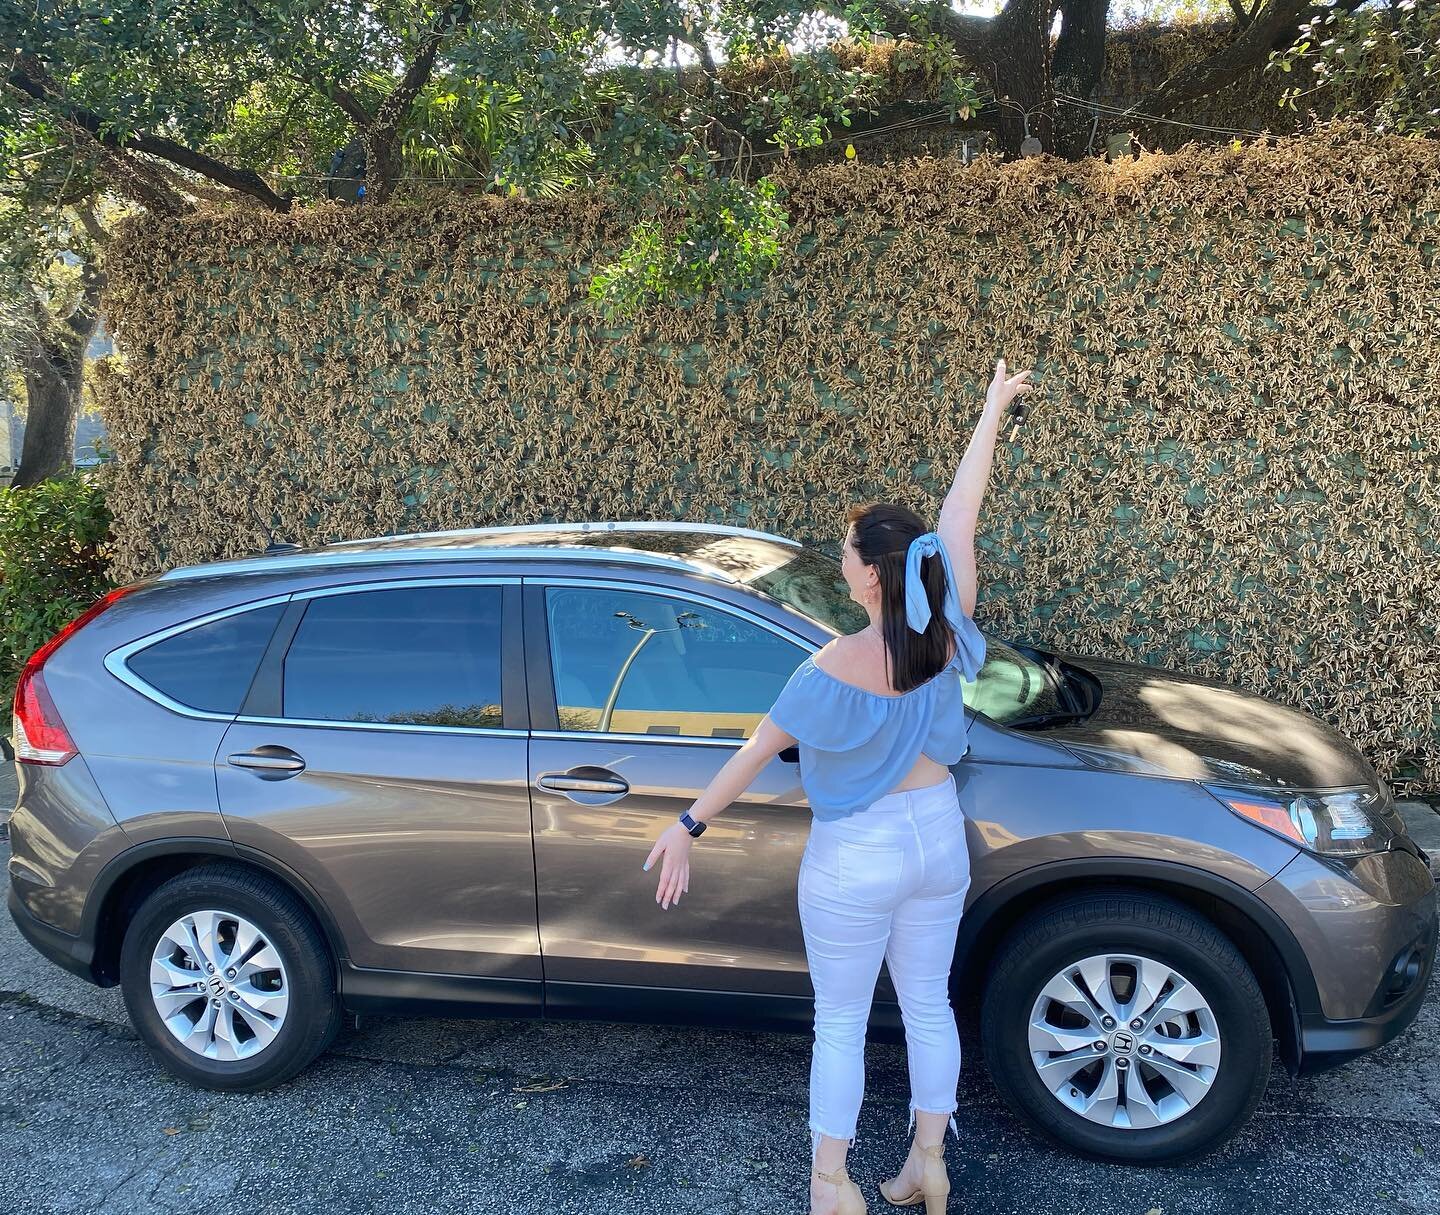 🎶Life is a highway🎶and now I can drive it
*
*
*
*
*
*
*
*
#newcar #firstcar #lifeisahighway #bigpurchase #happiness #freedom #adulting #car #honda